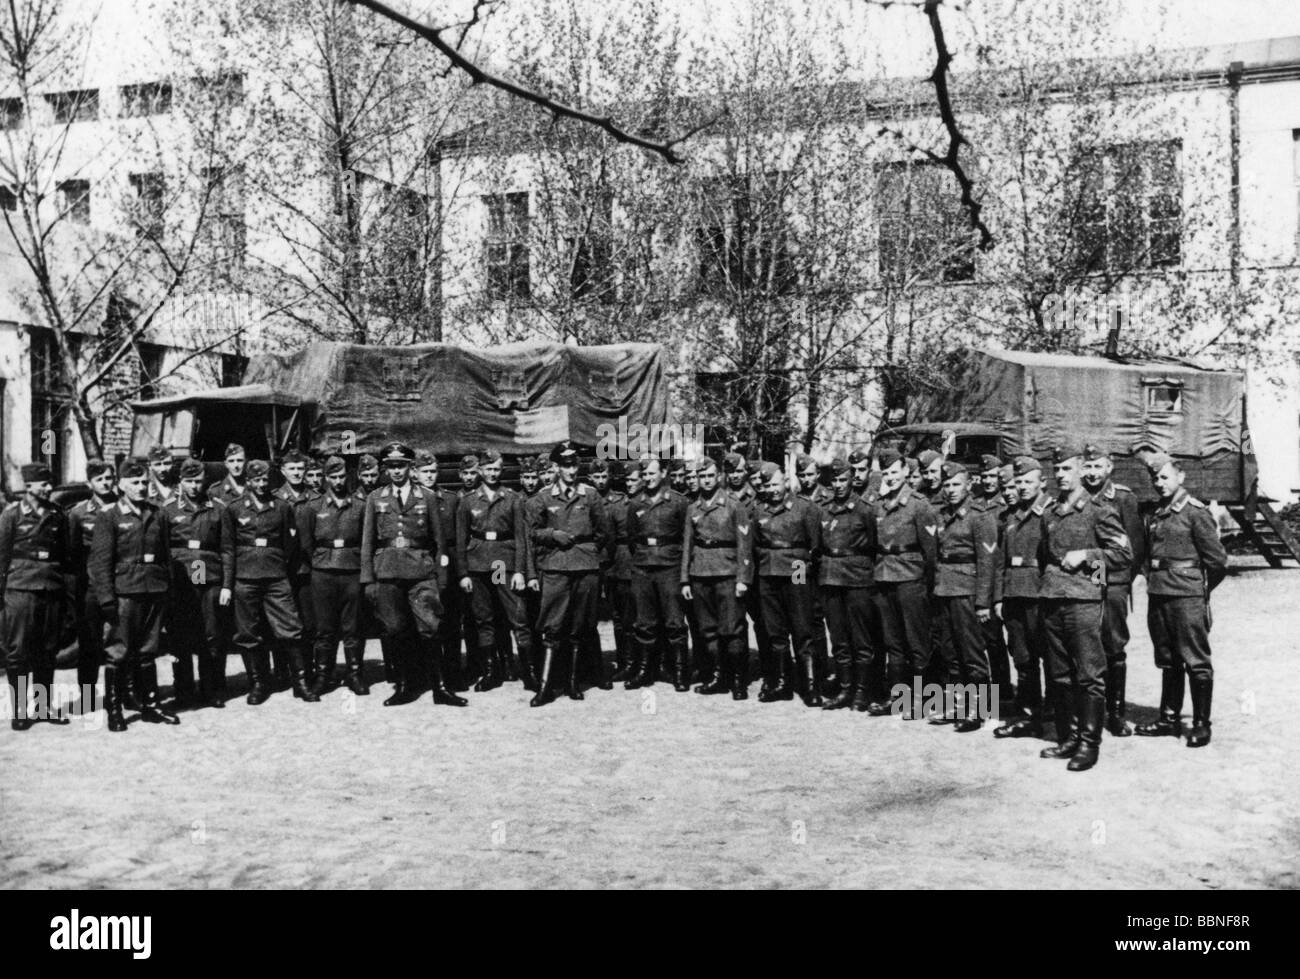 events, Second World War / WWII, Russia 1942 / 1943, German soldiers in front of the hospital of Krivoy Rog, Ukraine, group picture, spring 1942, Wehrmacht, 20th century, historic, historical, supplies, unit, logistics, Third Reich, Soviet Union, USSR, baggage, Eastern Front, lorry, lorries, supply battalion, uniform, uniforms, Kryvyi Rih, occupation, medicine, people, 1940s, Stock Photo